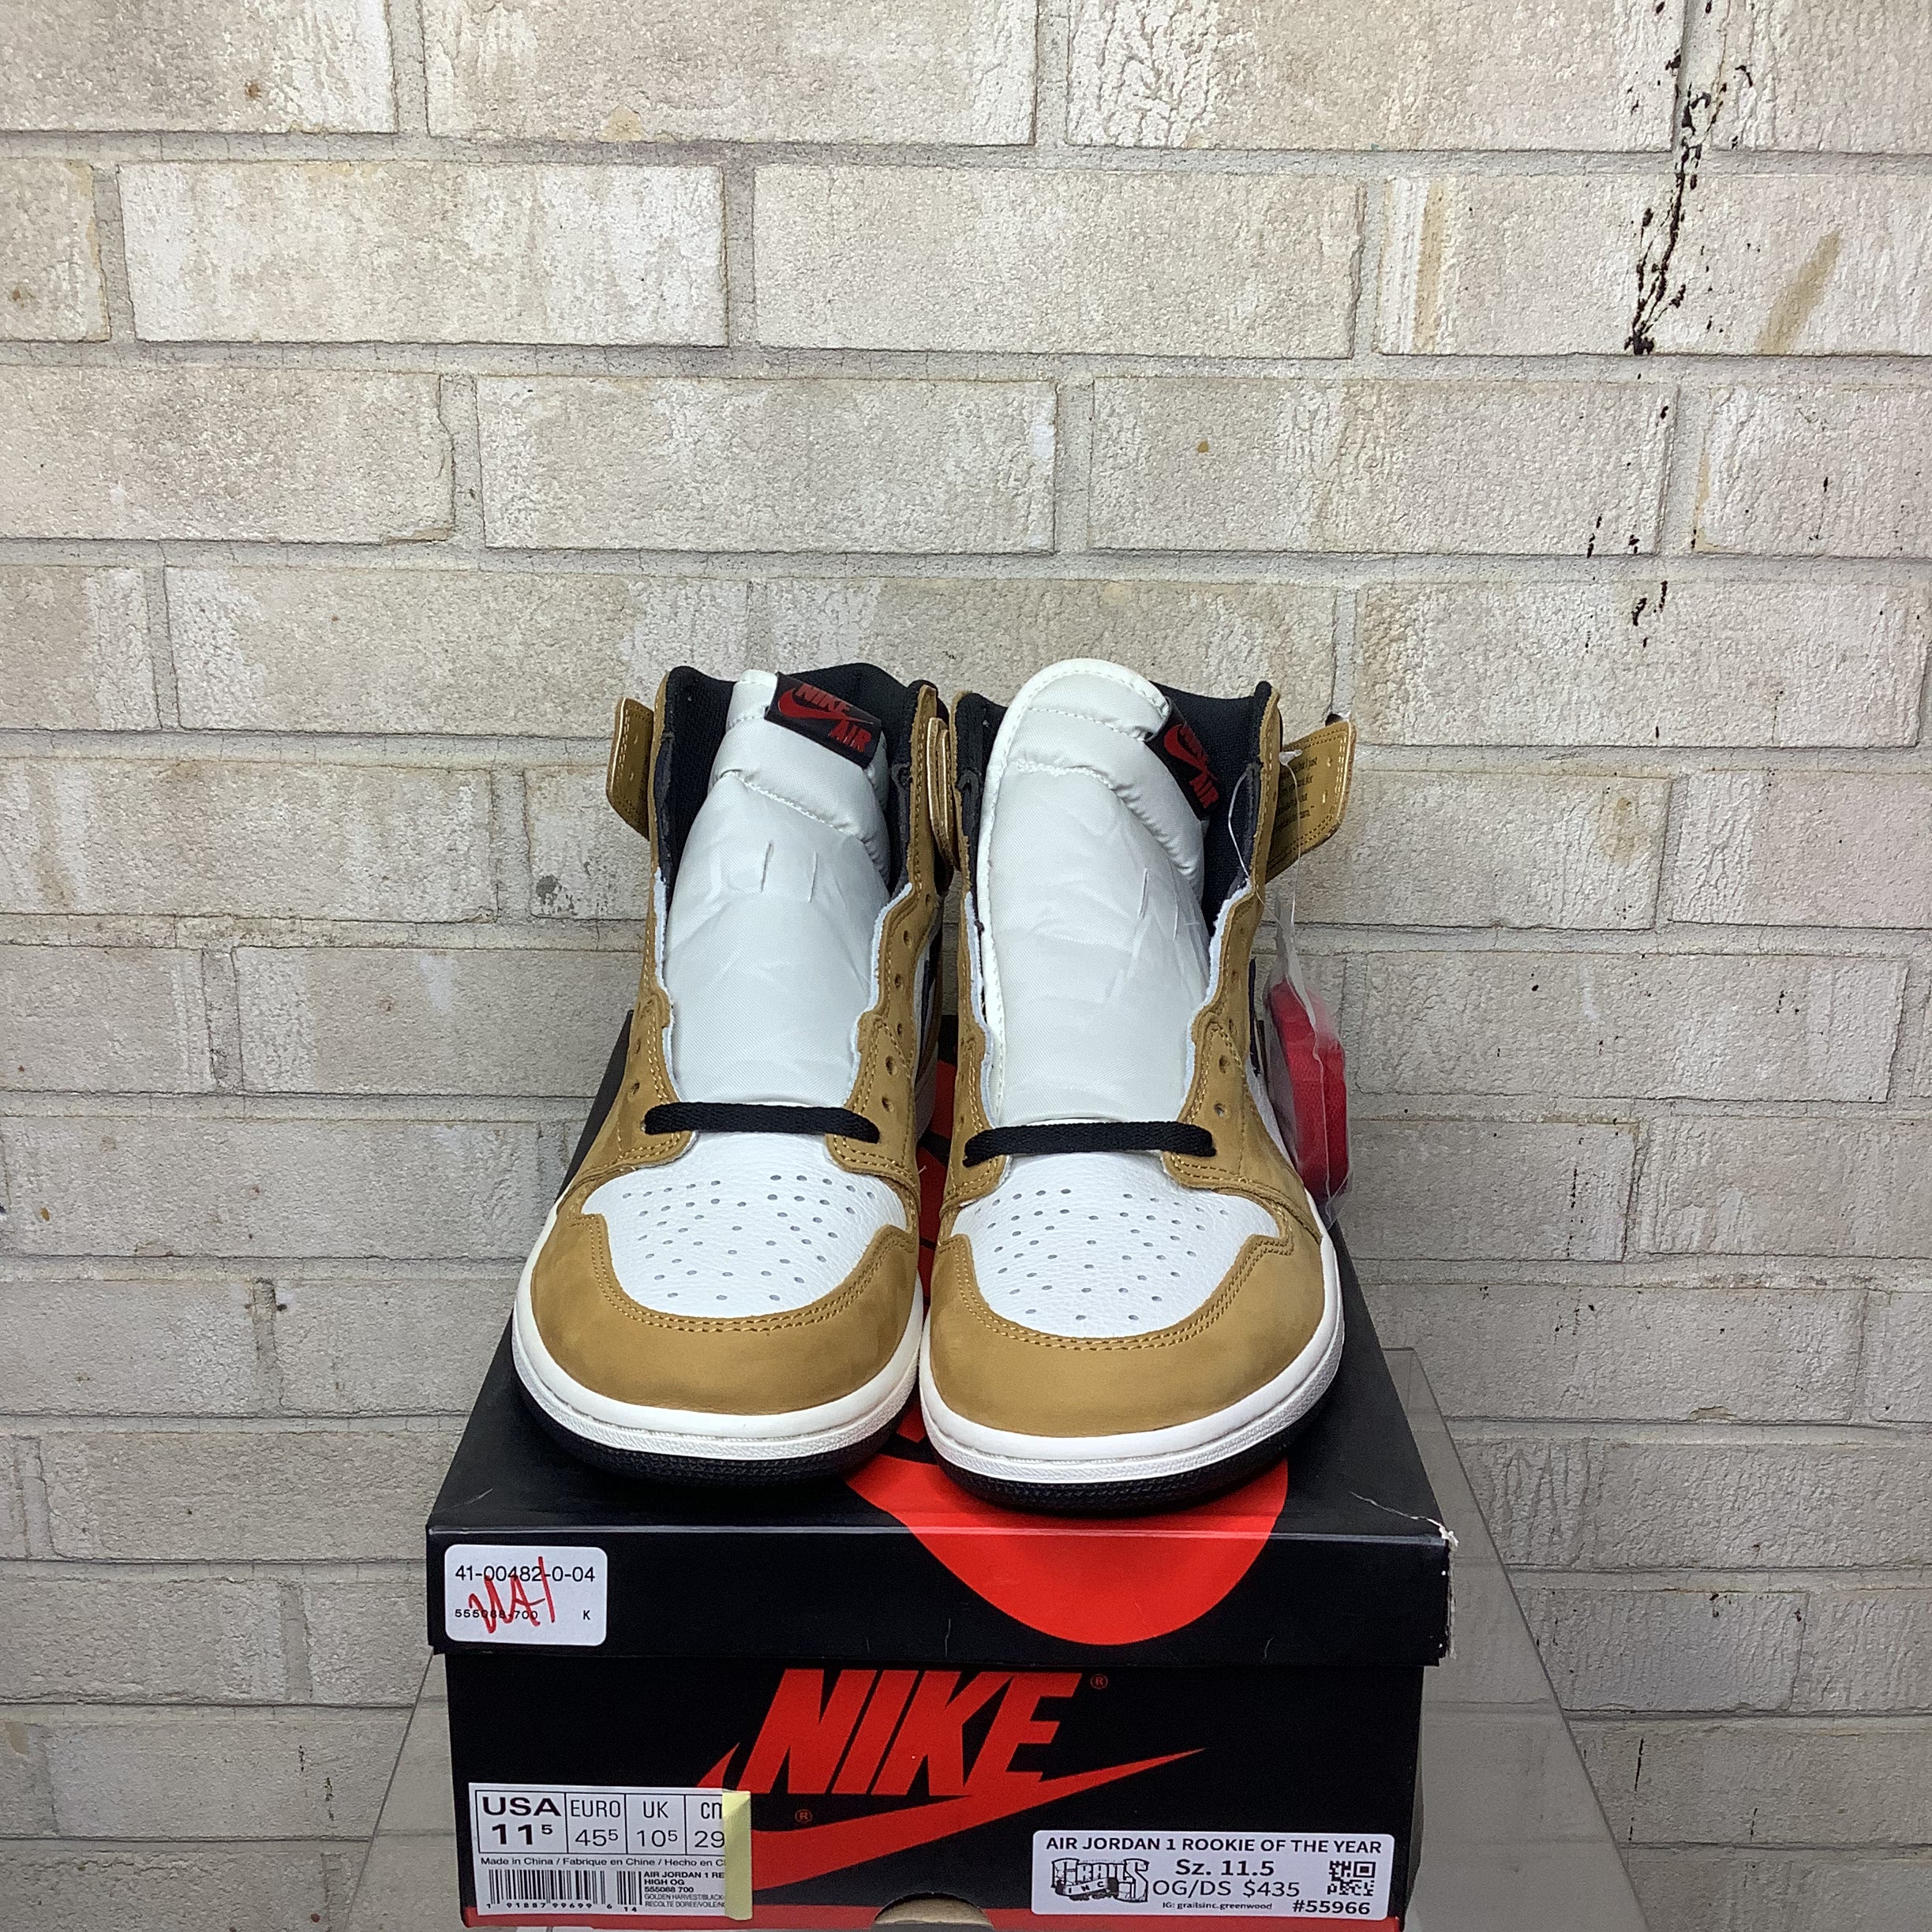 AIR JORDAN 1 ROOKIE OF THE YEAR SIZE 11.5 555088-700